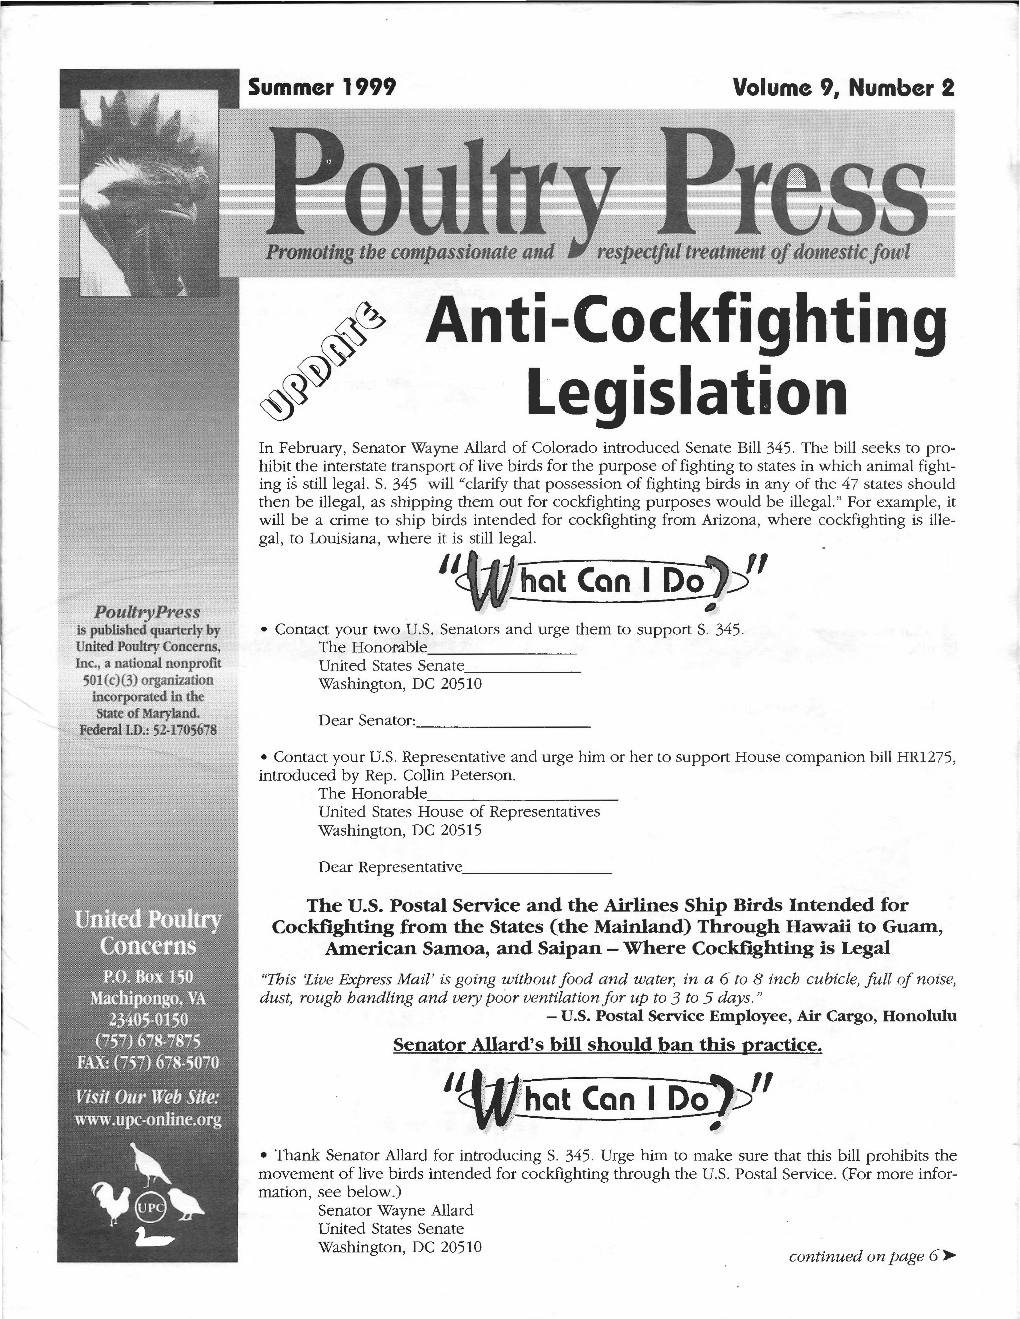 UPC Summer 1999 Poultry Press